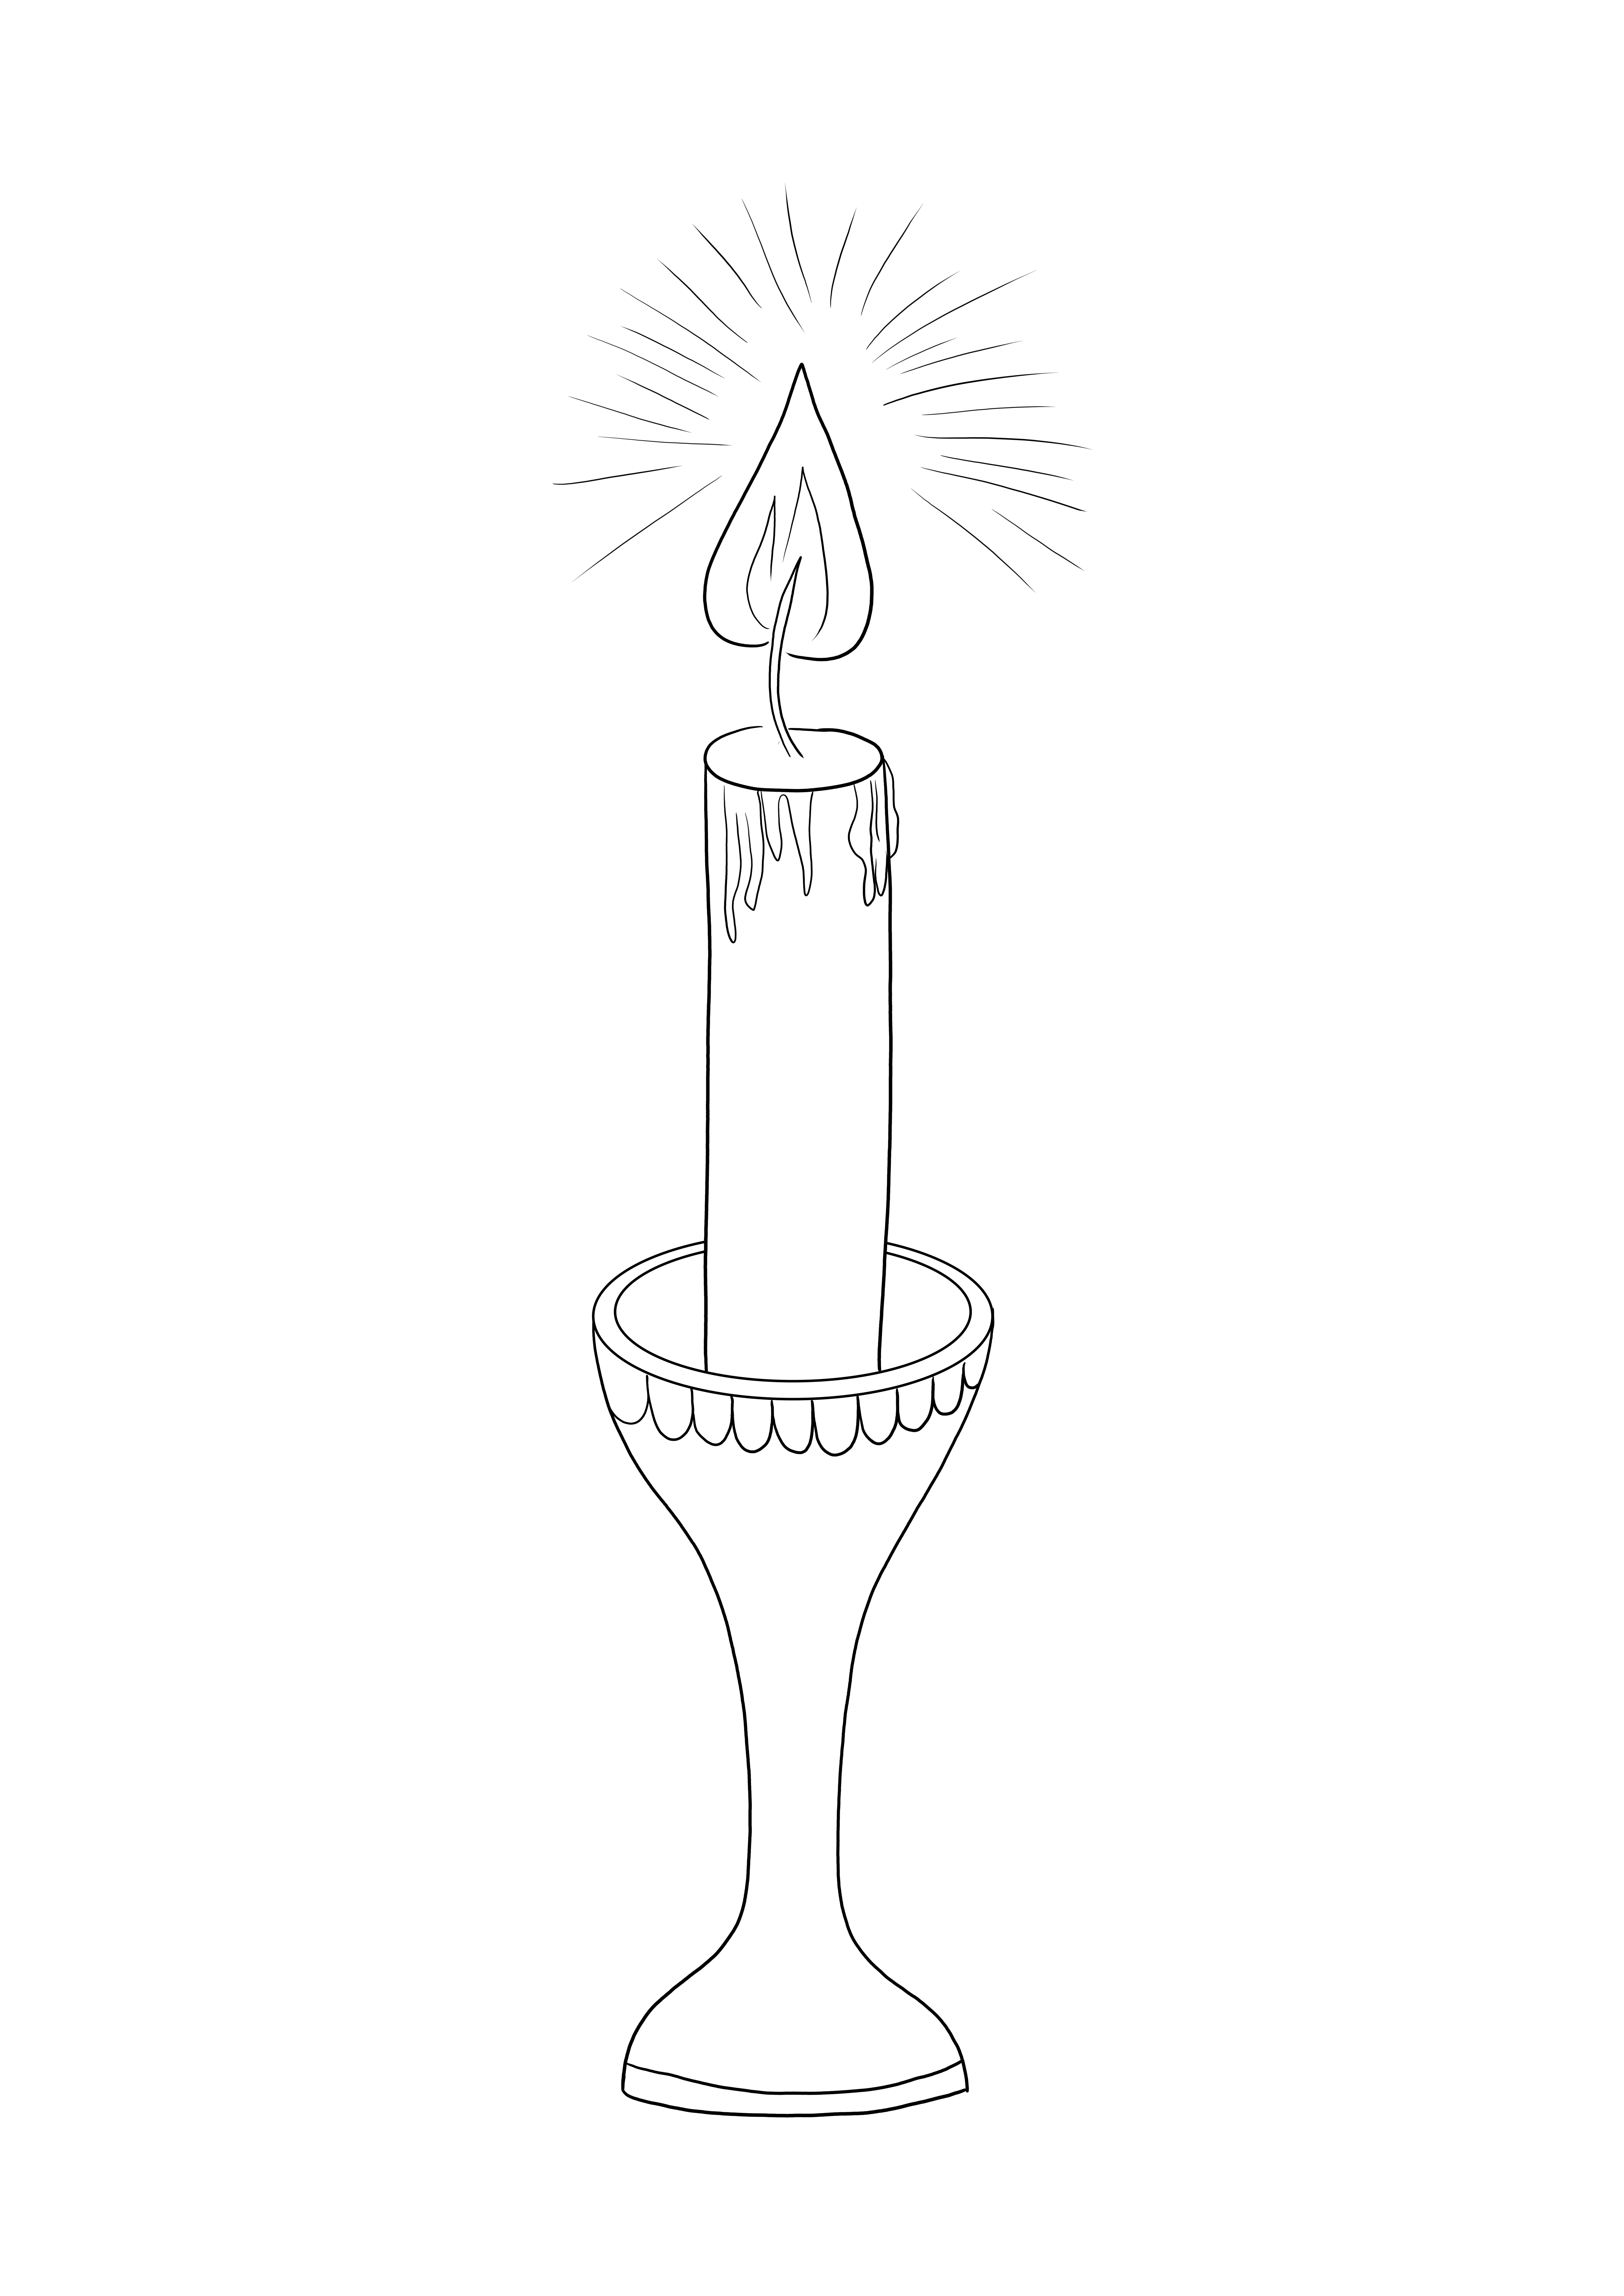 A lit Candle ready to be colored for a Christmas joy celebration-free to download or print